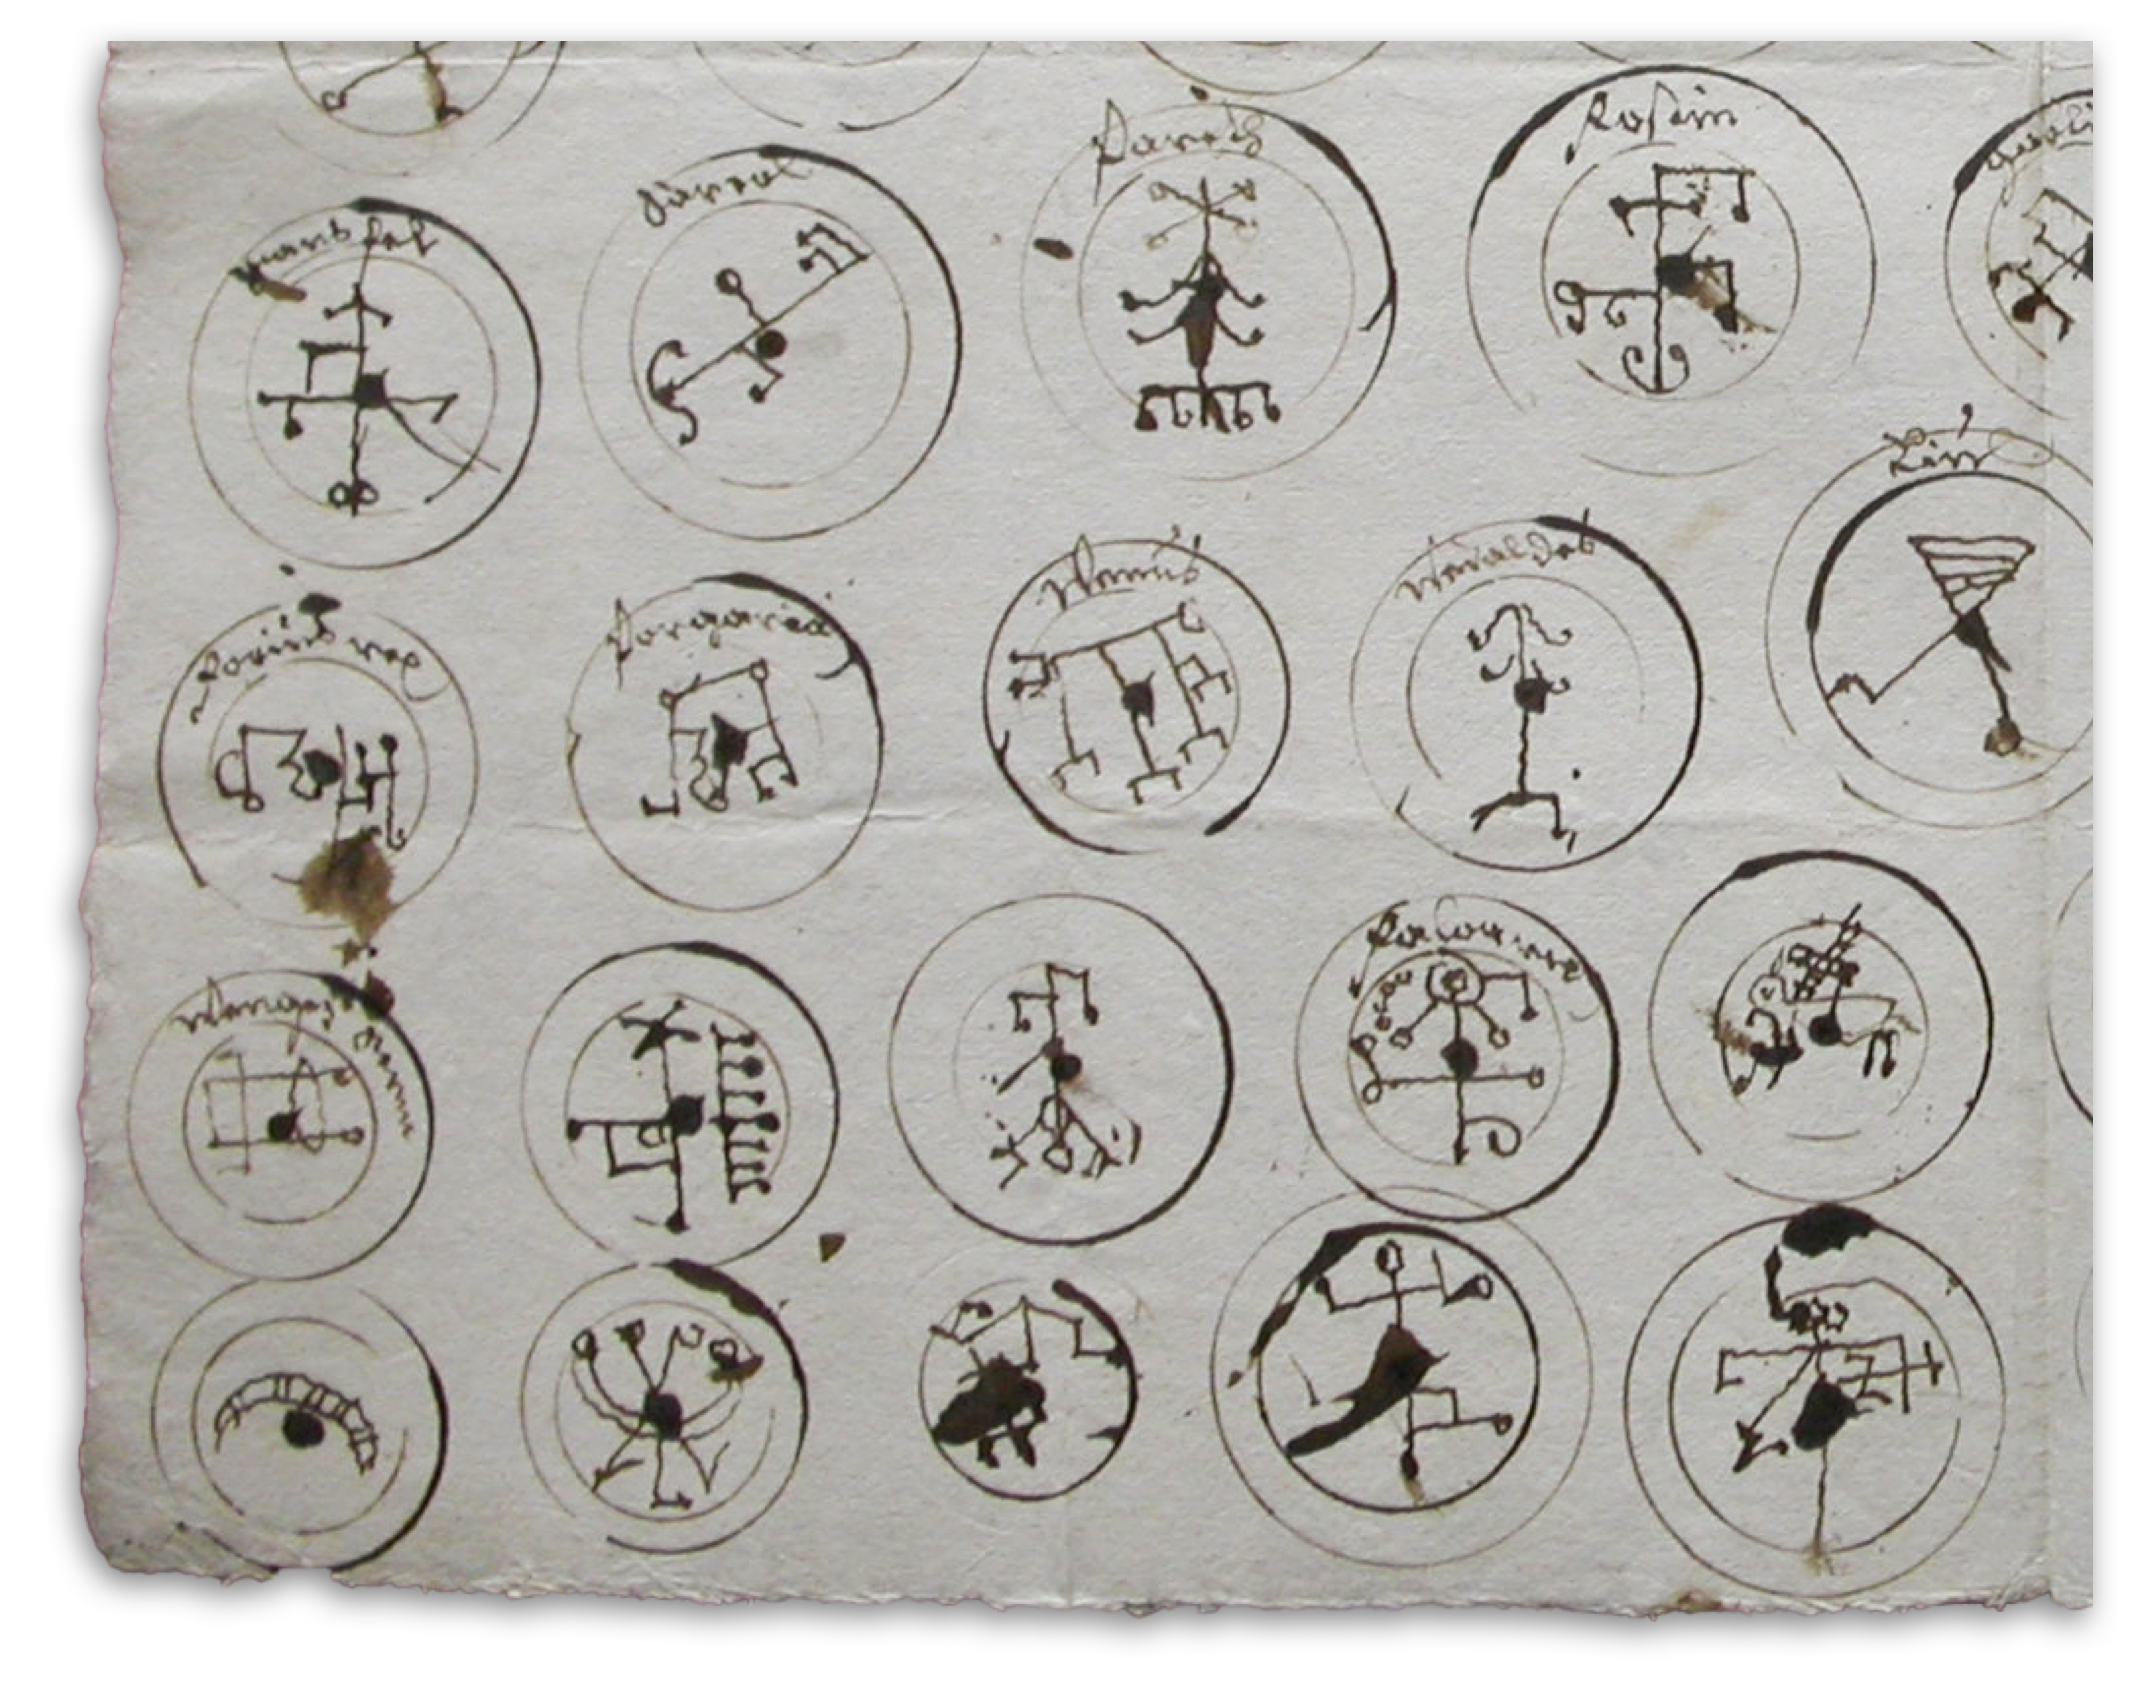 [close up, bottom left] 72 Devil's Seals from the trial records of Ludwig Perkhofer, 1683